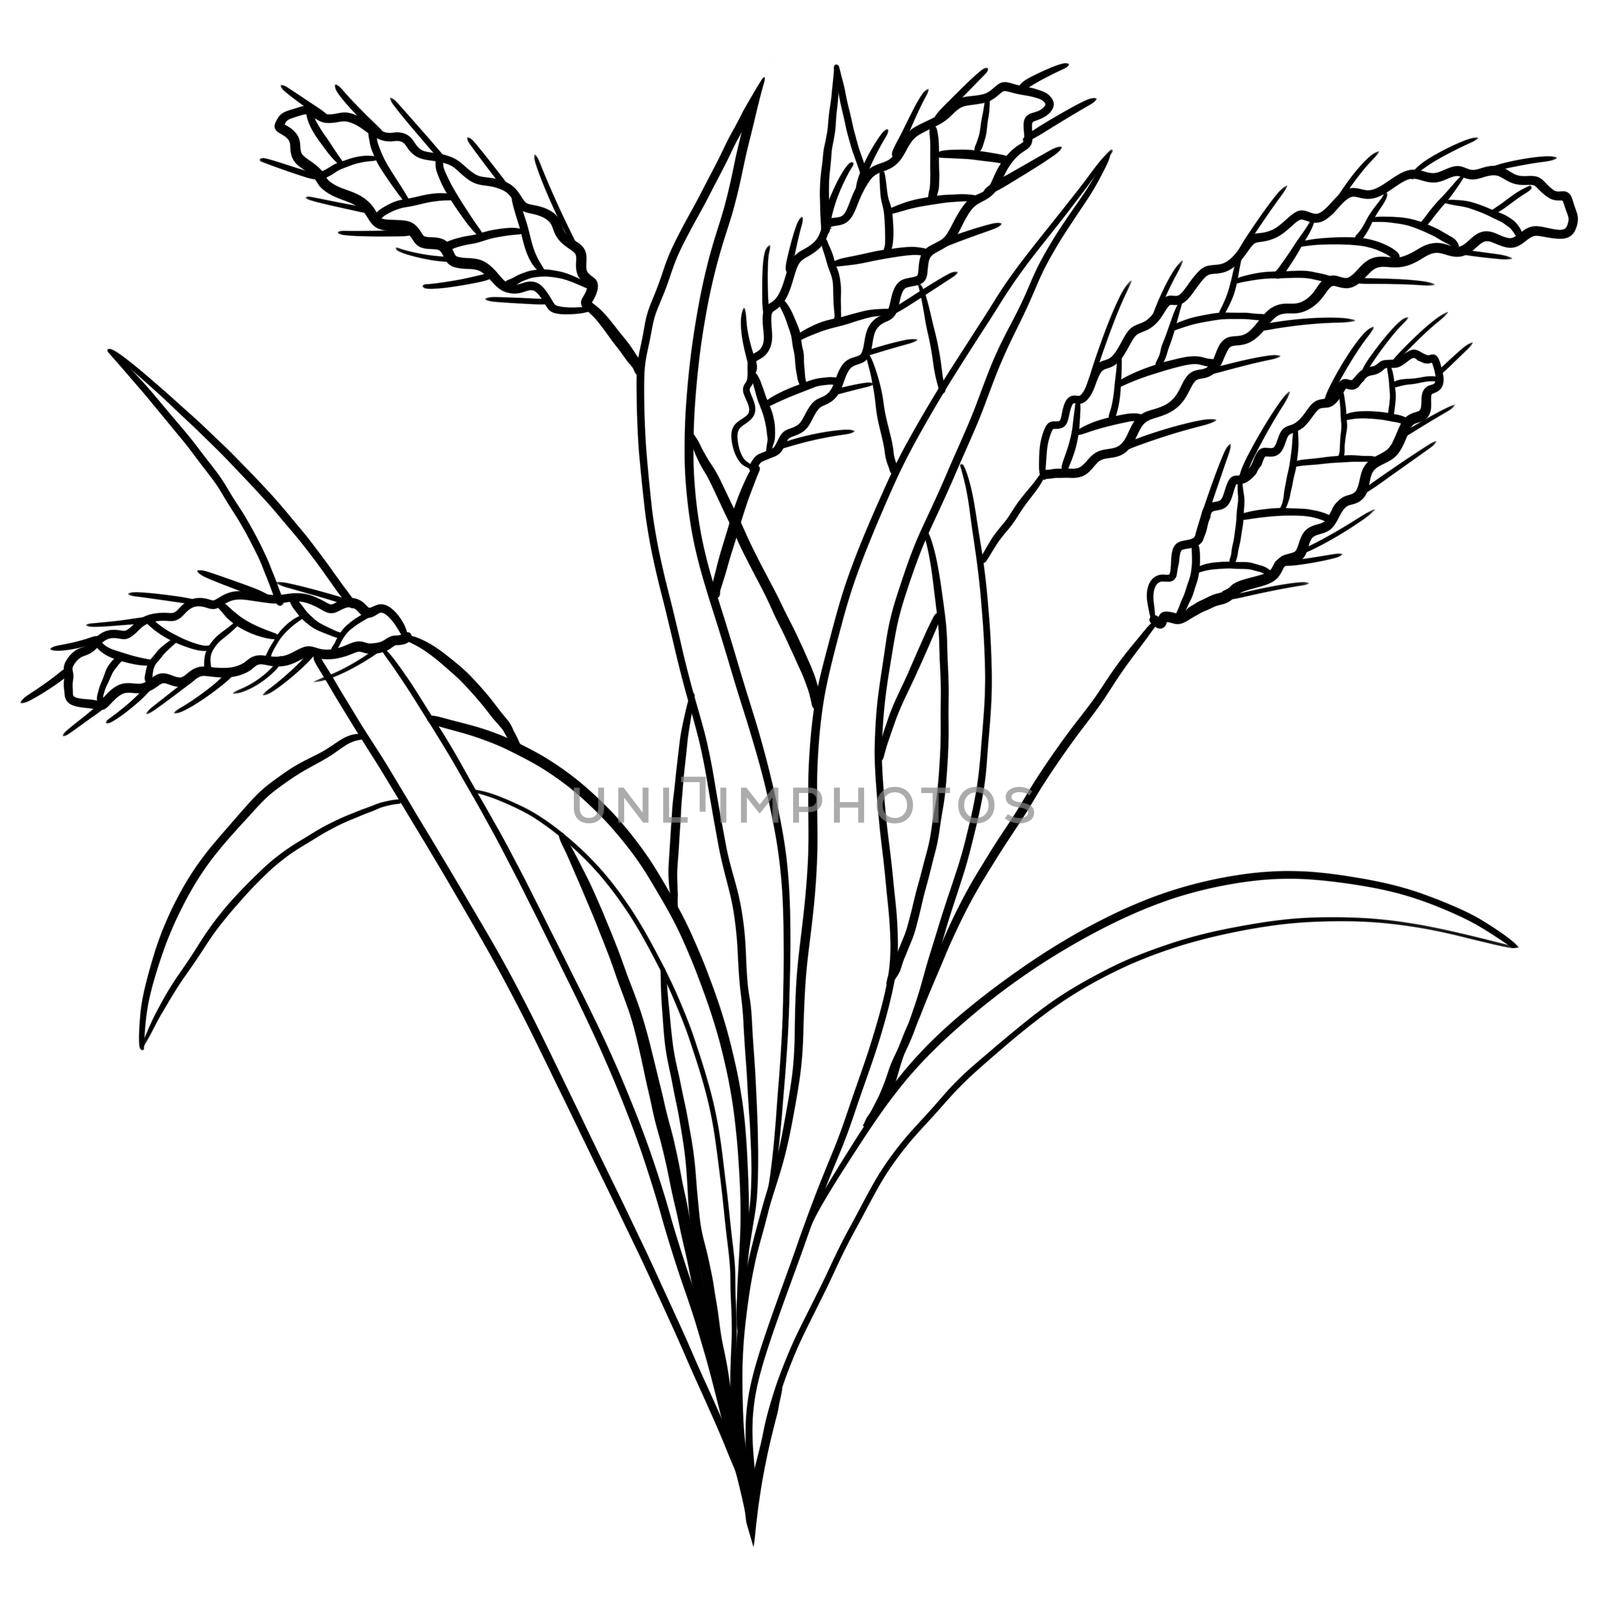 Wheat bread harvest, baking bakery concept. Floral illustration with long leaves in black line simple minimalist style. Nature plant herb print graphic ink botany